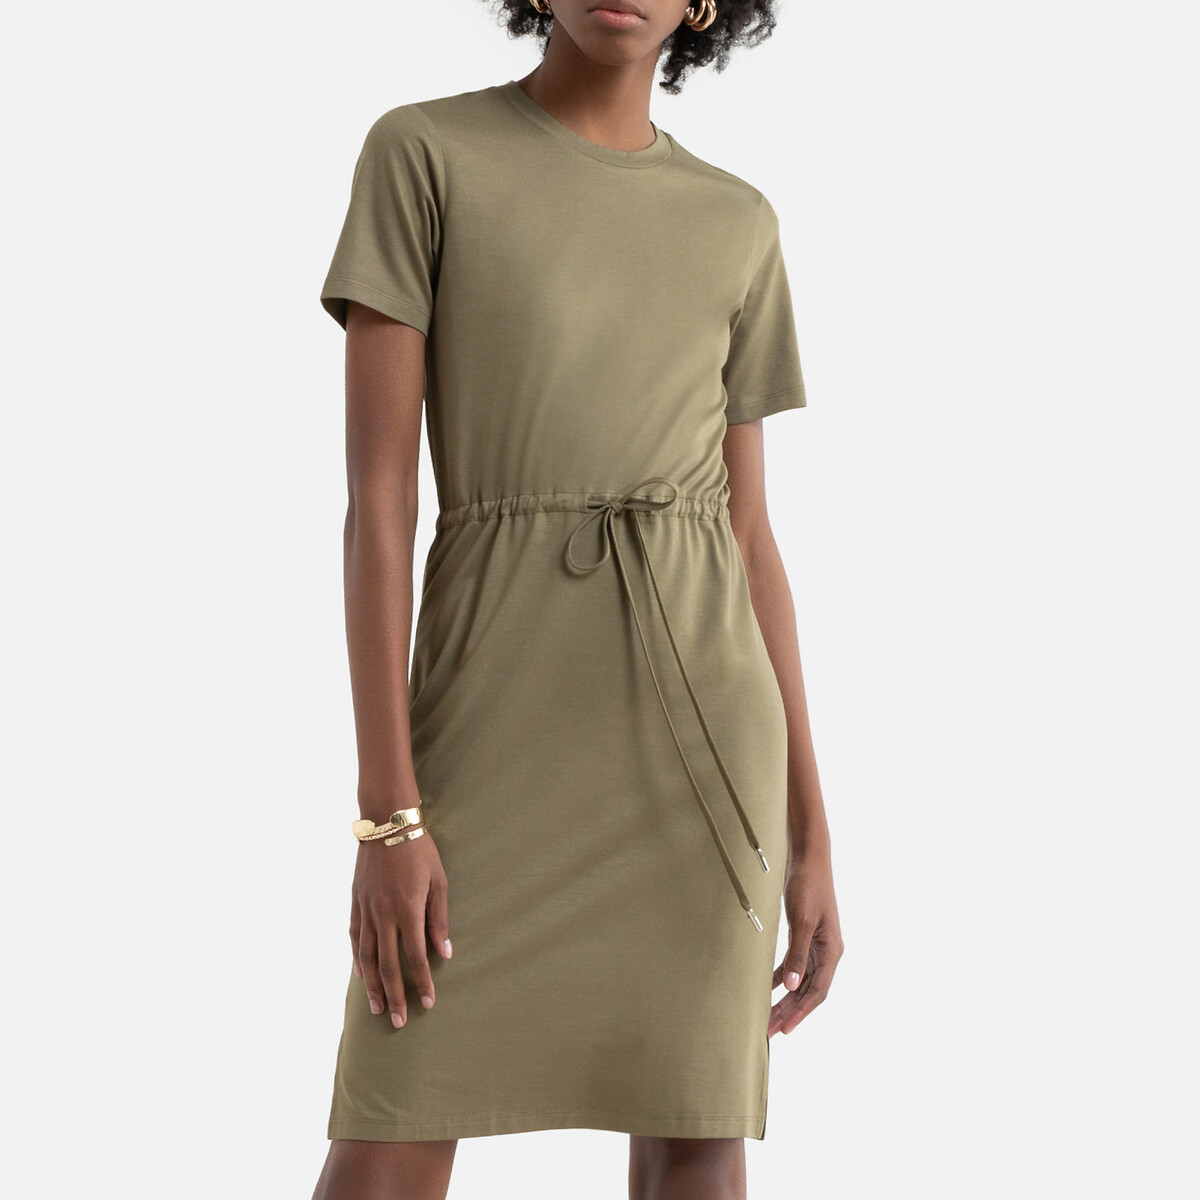 T-shirt dress with drawstring waist and ...